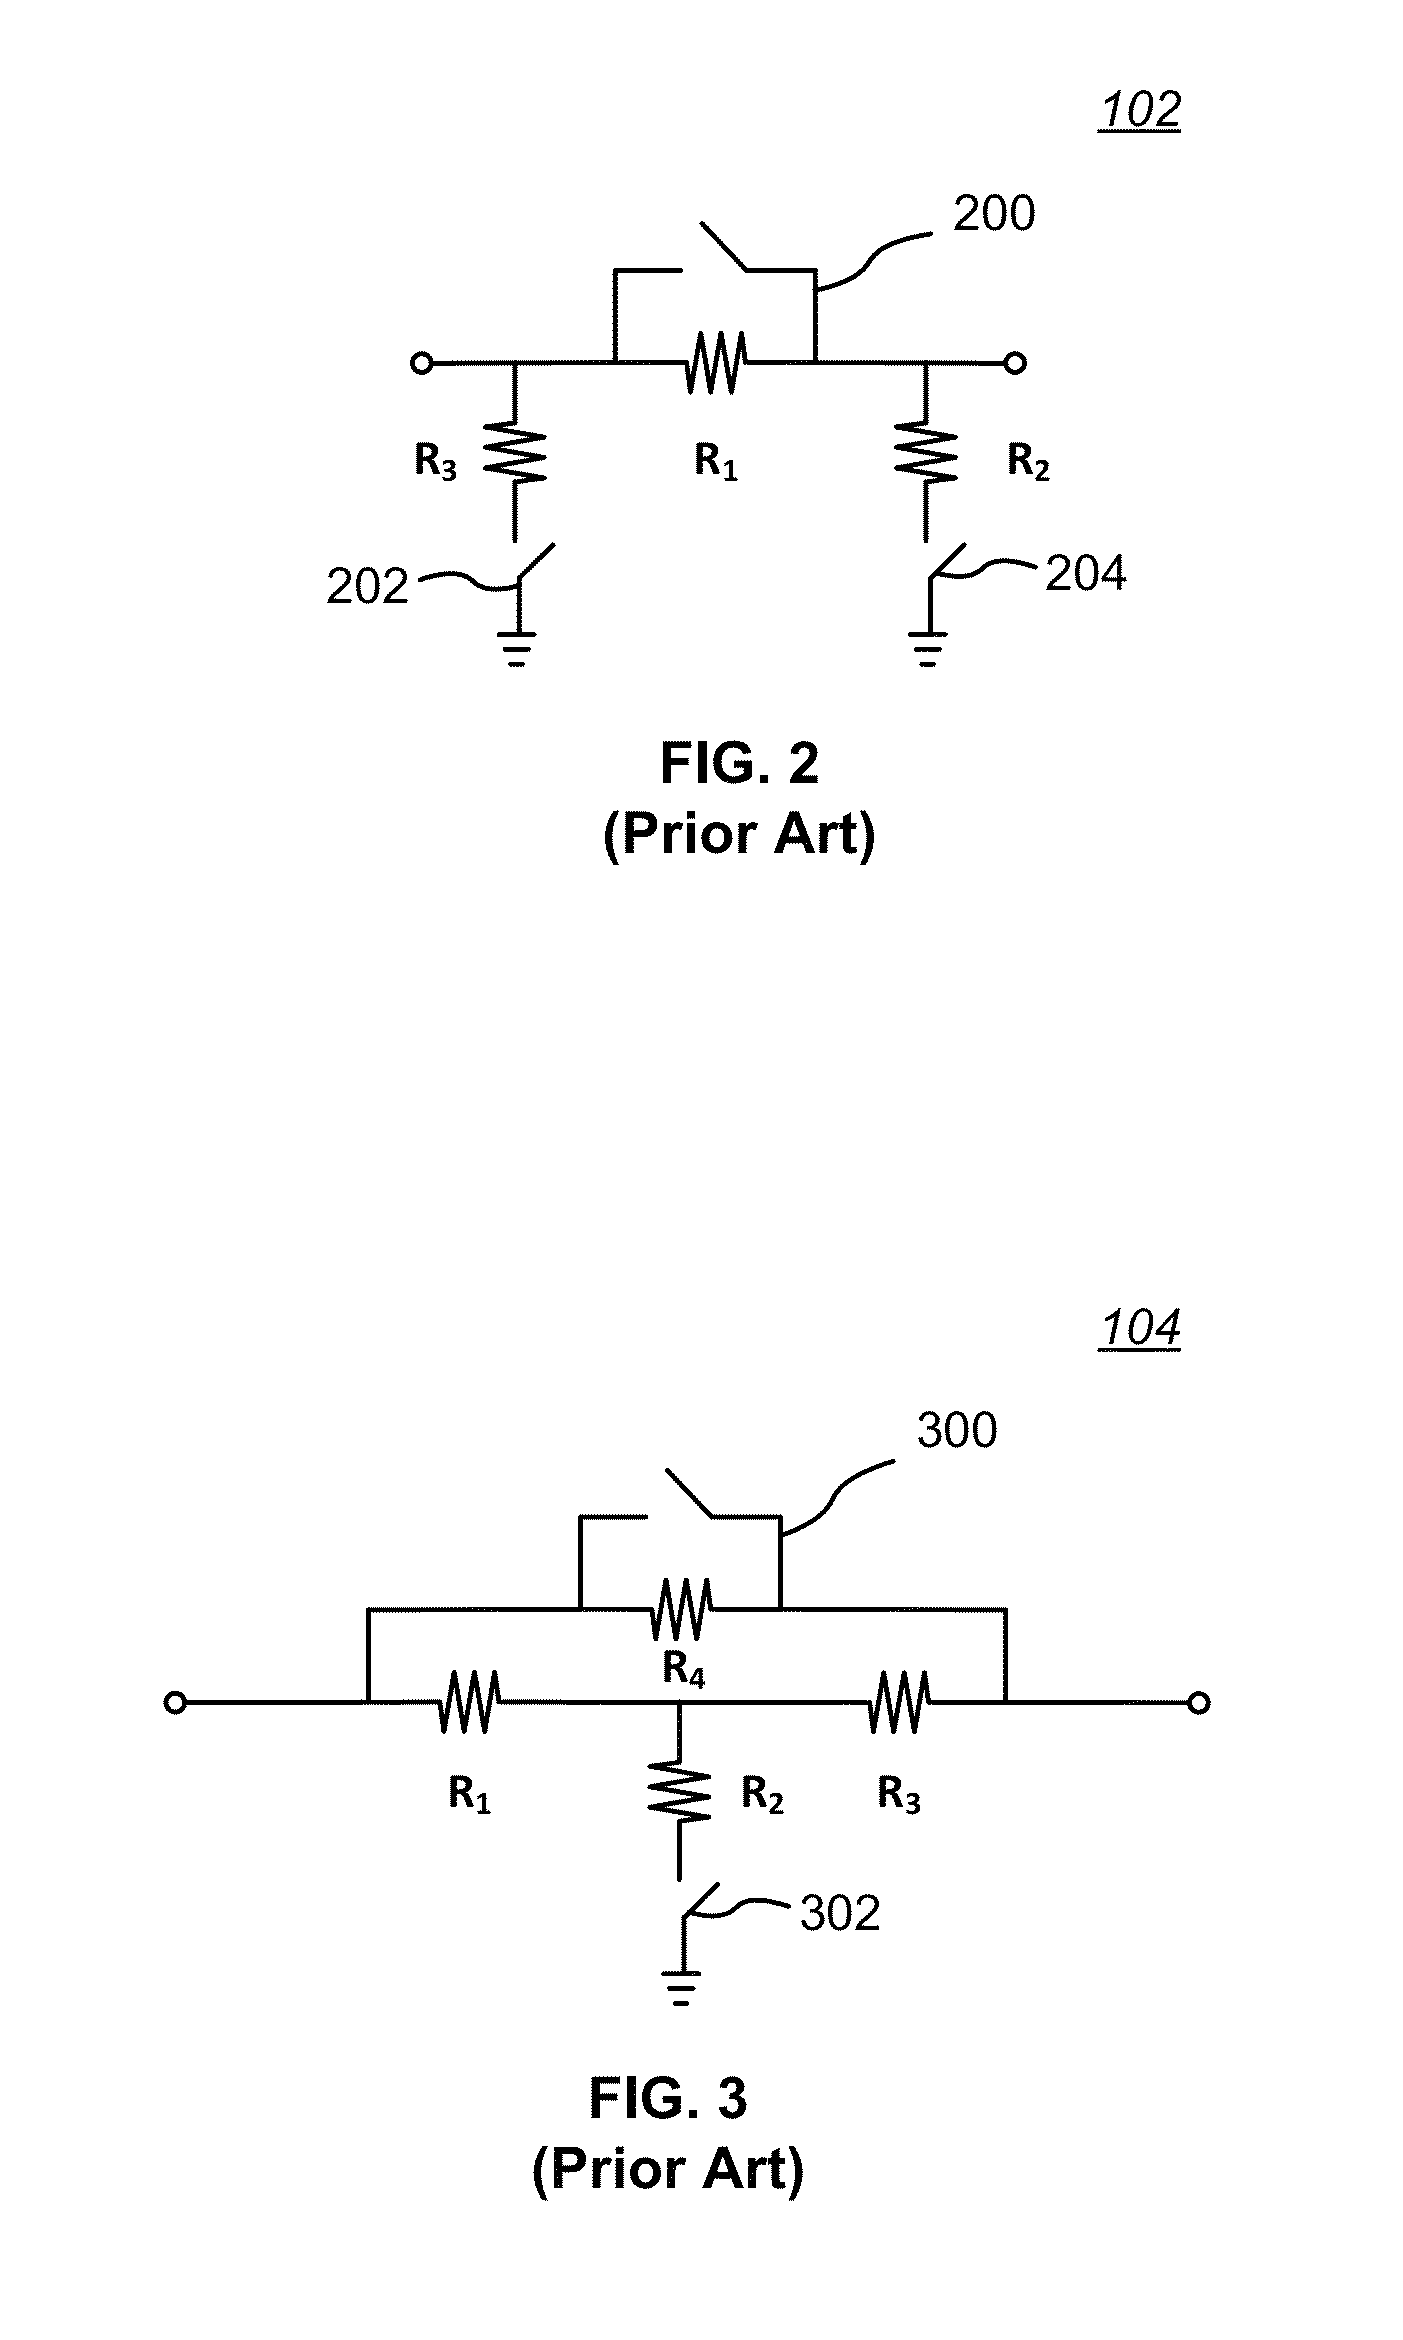 Method and apparatus for preventing digital step attenuator output power peaking during attenuation state transitions